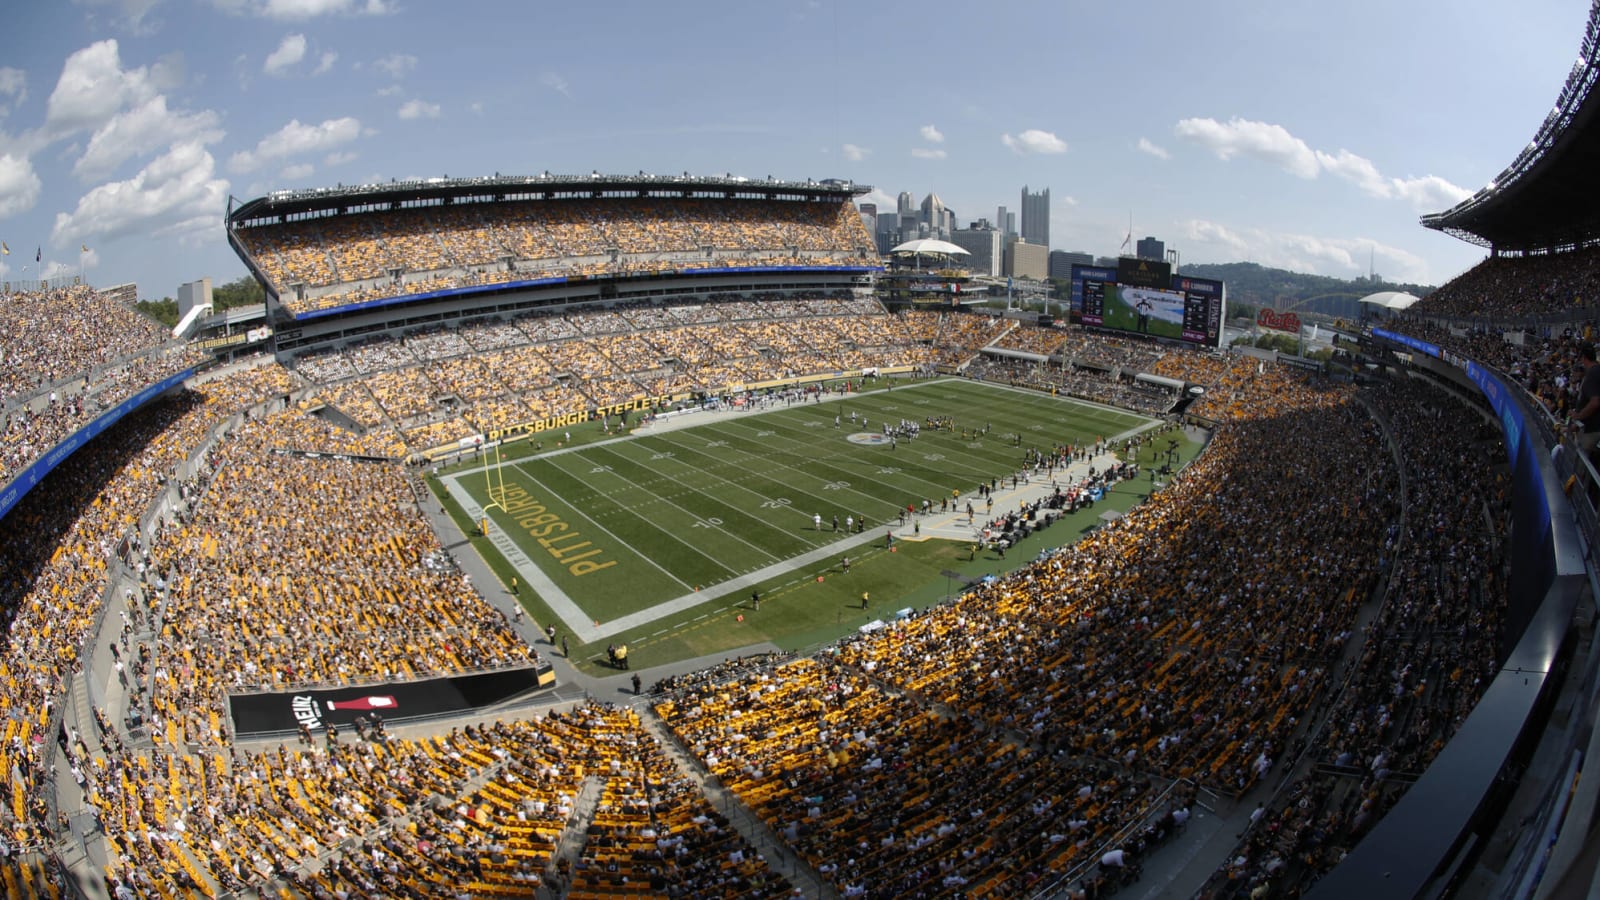 Group of pigeons take residence on field during Steelers-Saints game